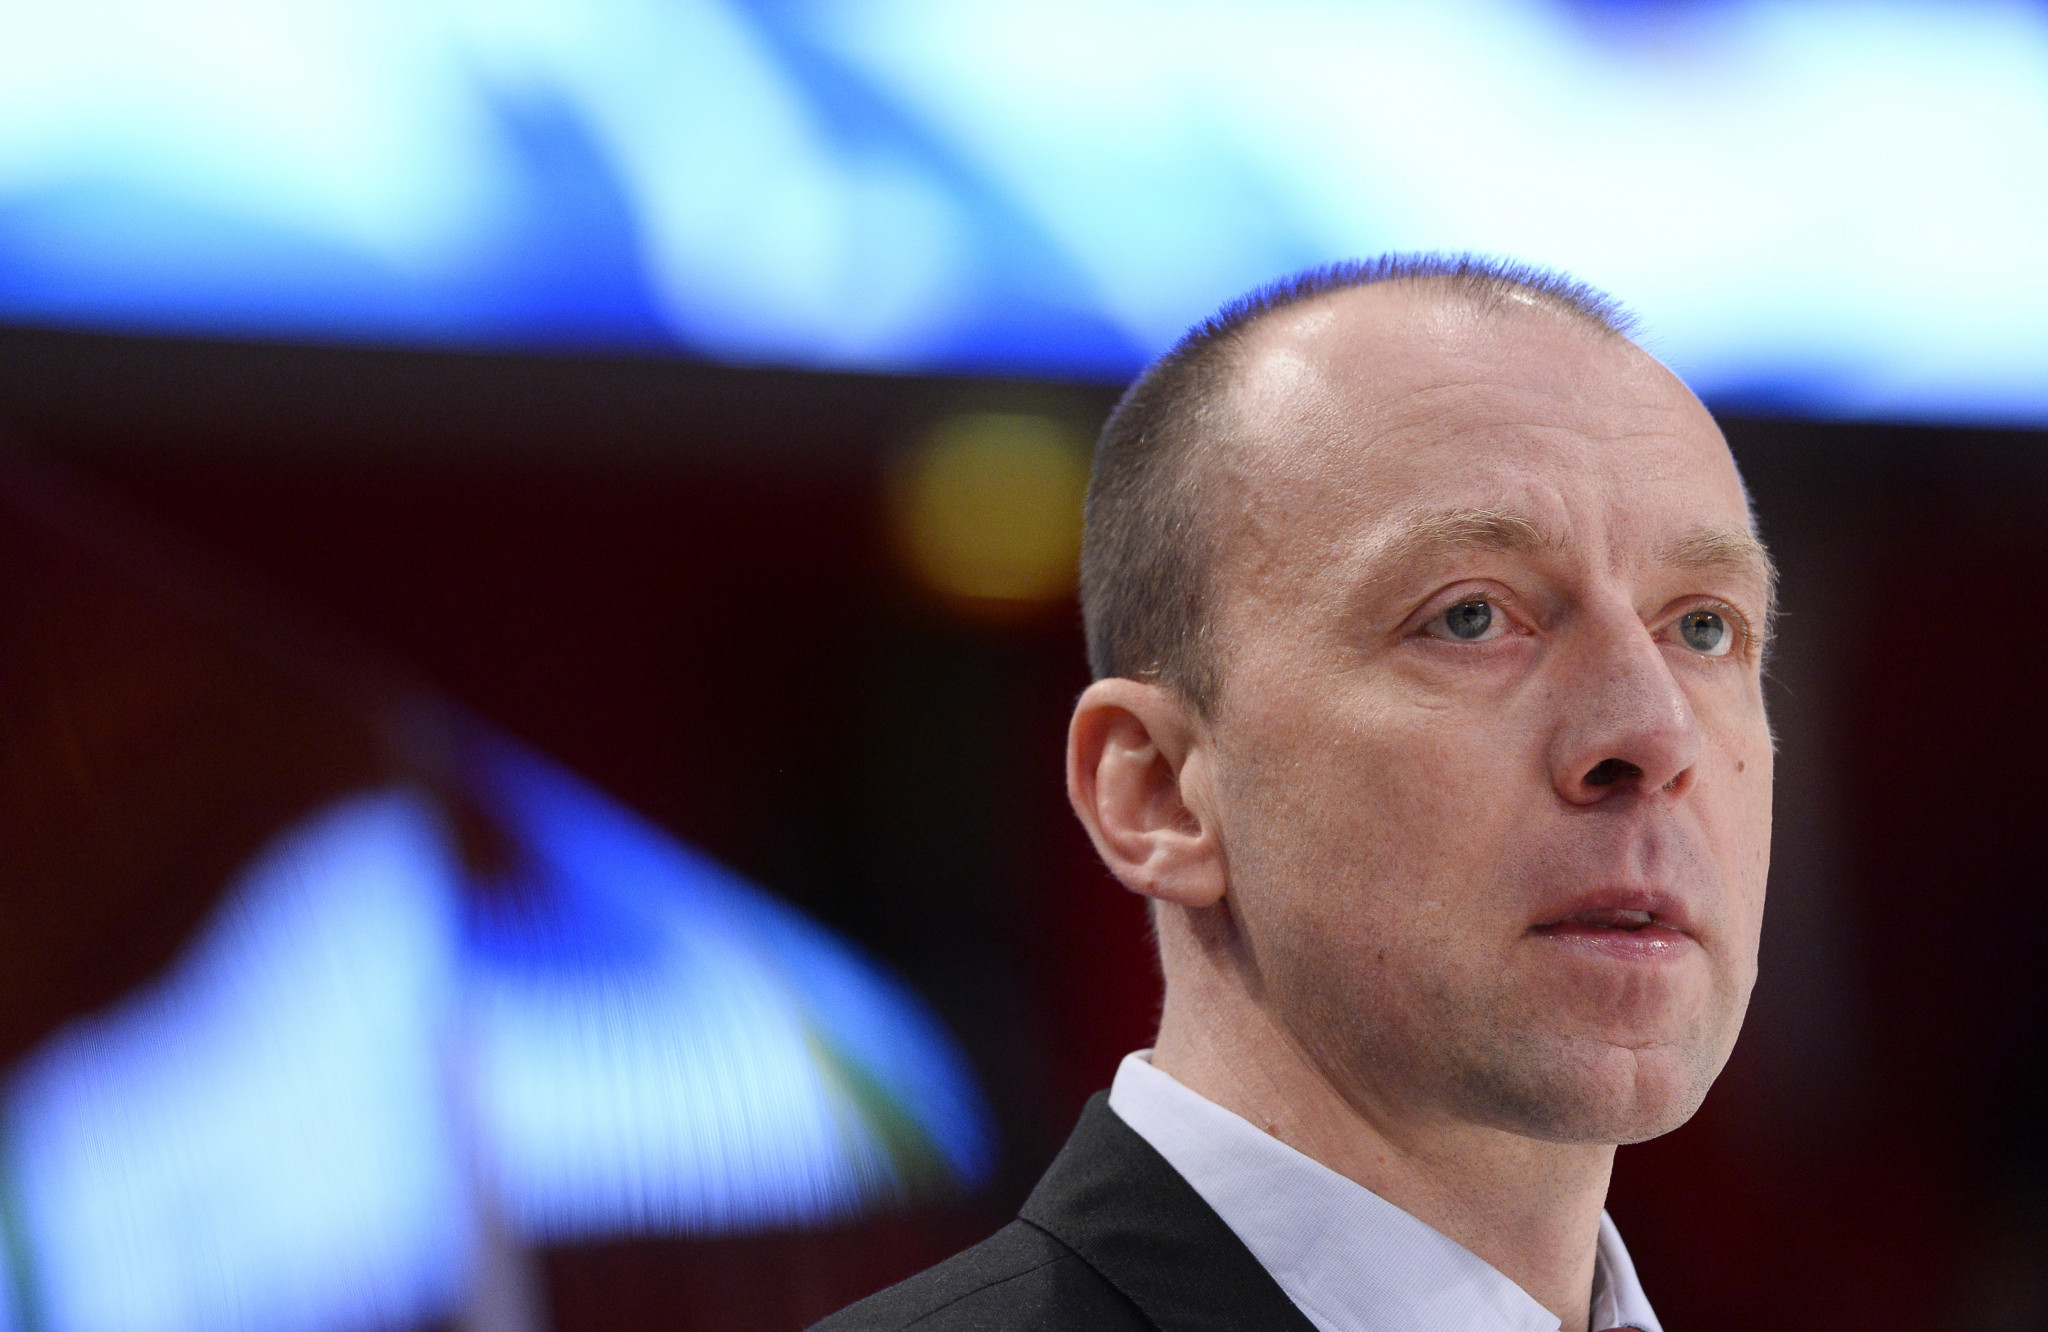 Kazakh head coach denied visa for IIHF World Championship and three players commit to Russia